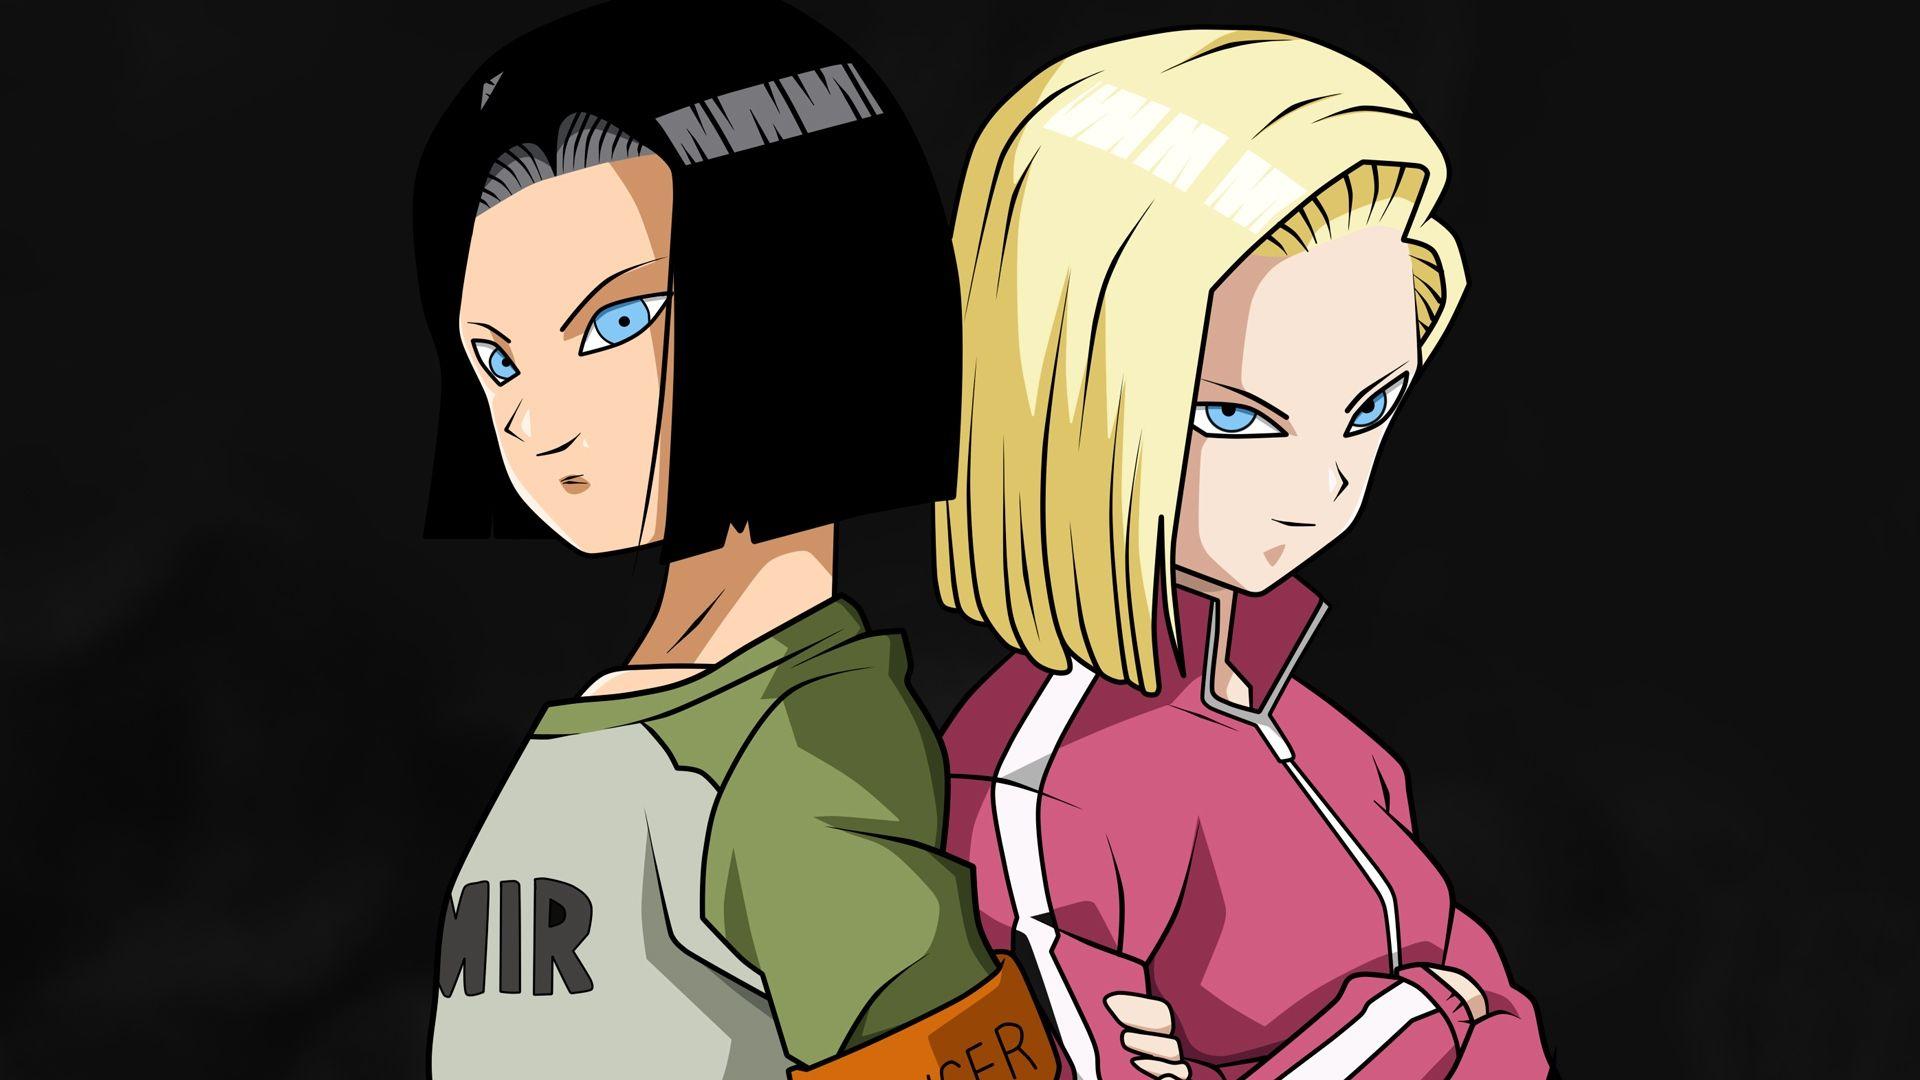 Android 17 Wallpapers Wallpaper Cave